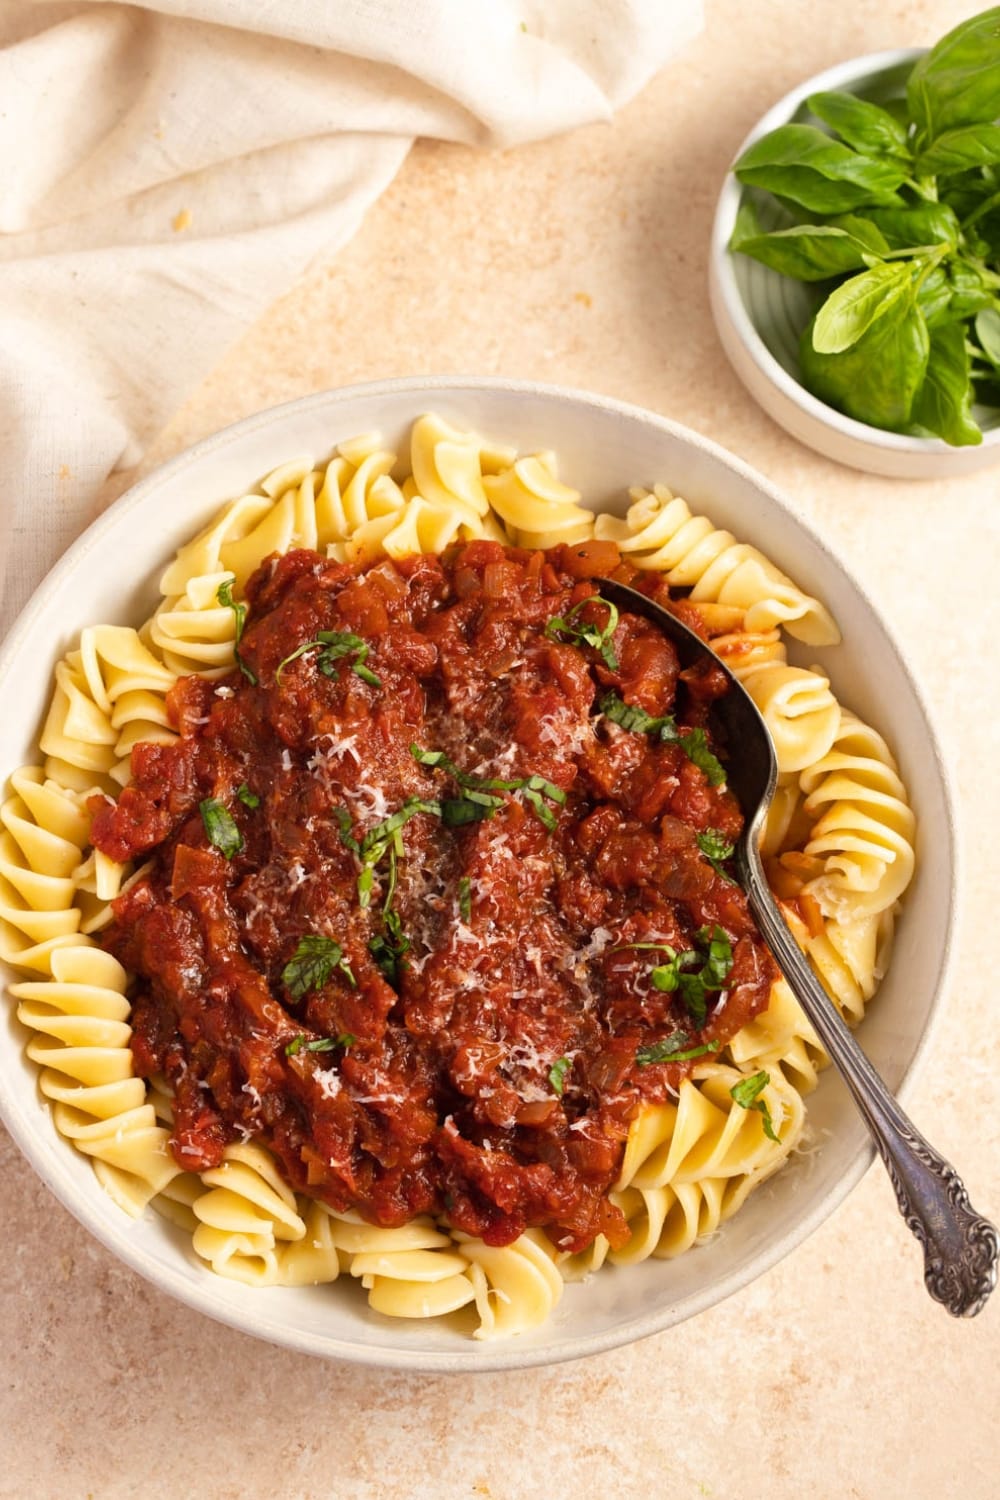 Zingy and Spicy Arrabbiata Sauce with Noodles